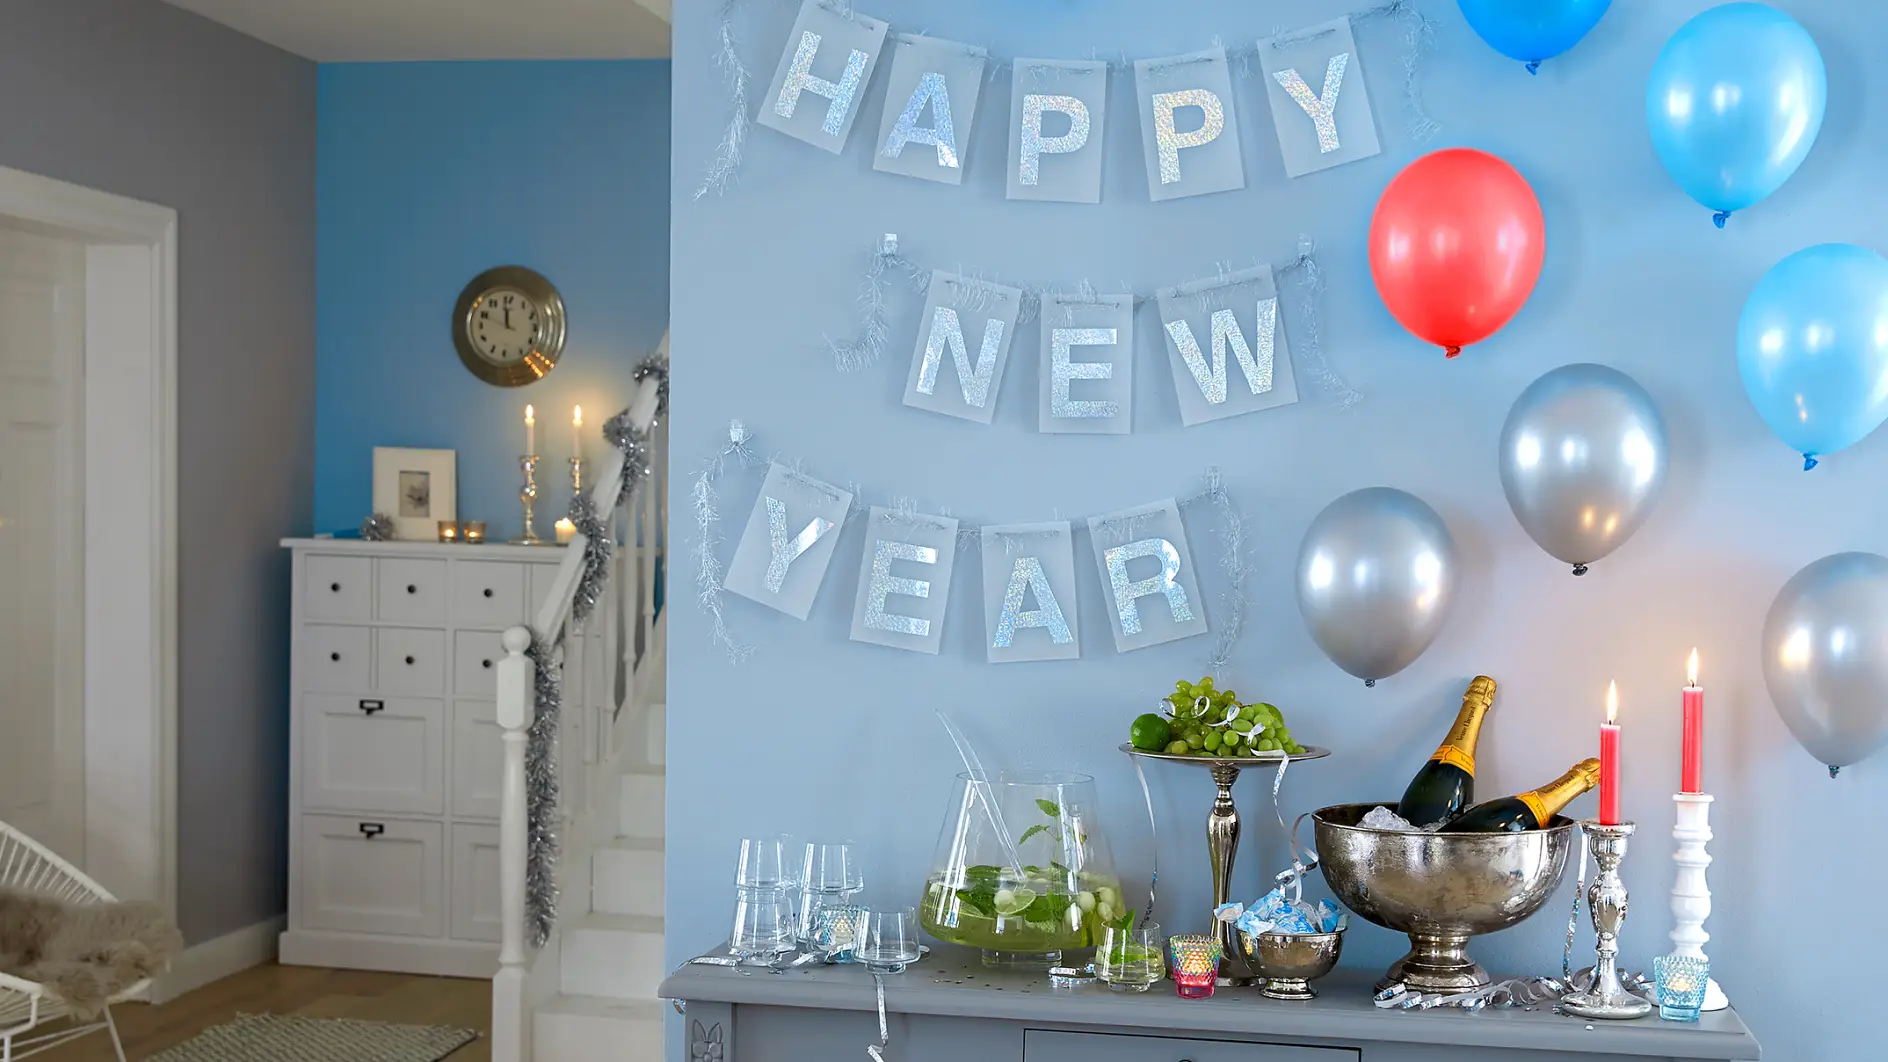 Make a wish – for a happy new year! The festooabove the bar shimmers in all colors thanks to holographic film. Just like the balloons, it is attached with tesa Powerstrips® and can be removed without a trace.